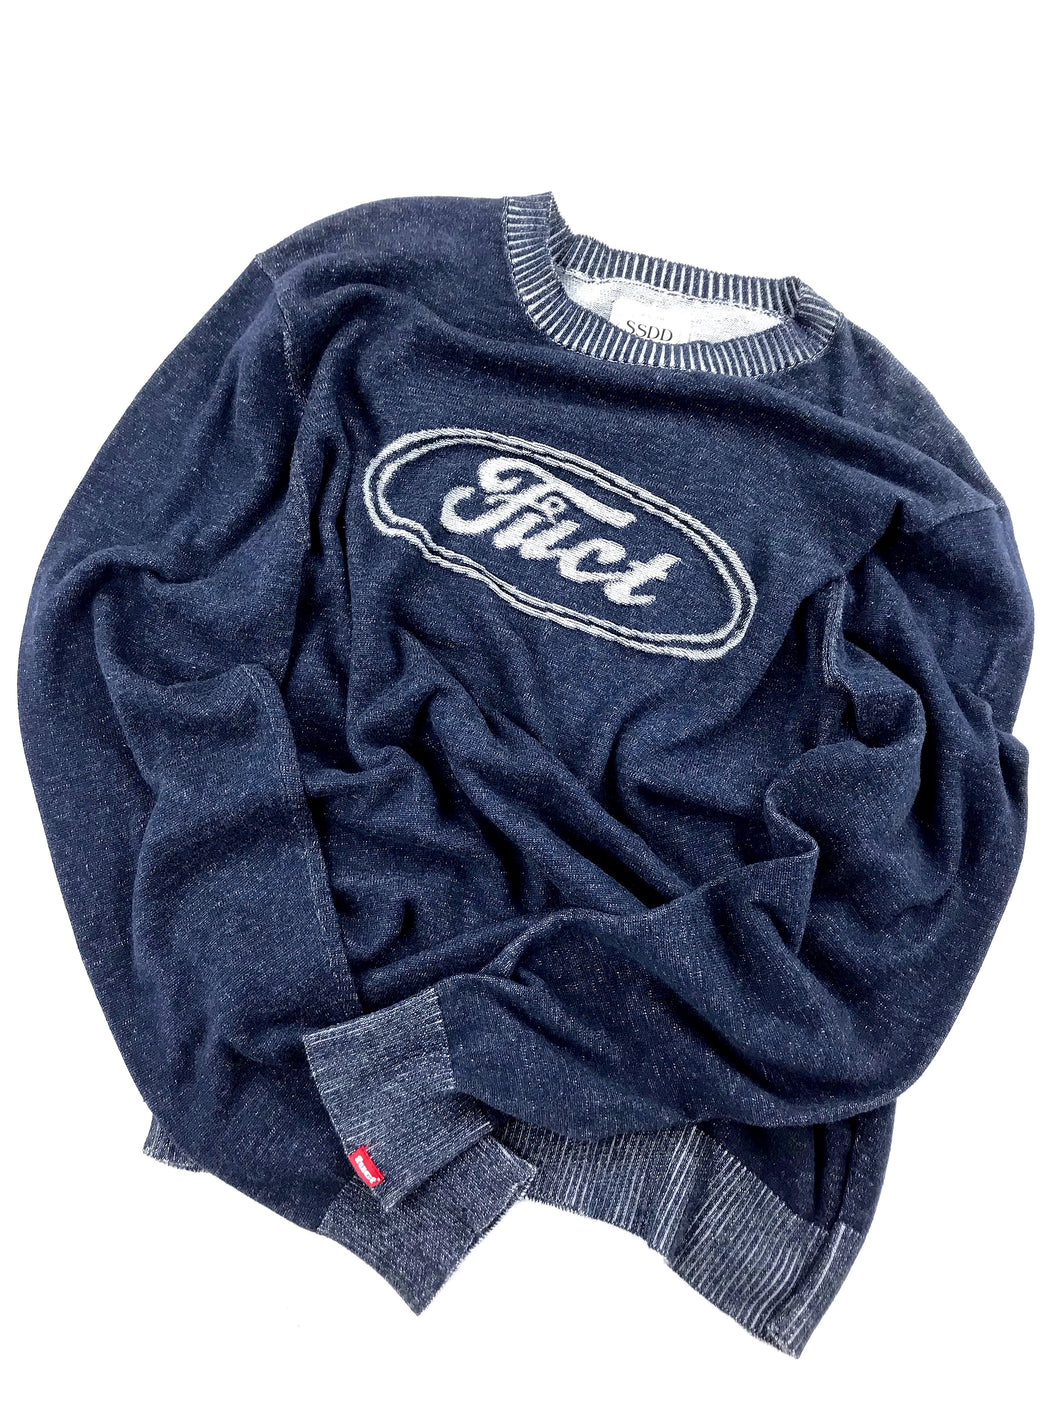 FUCT SSDD “Ford” Knit Sweater